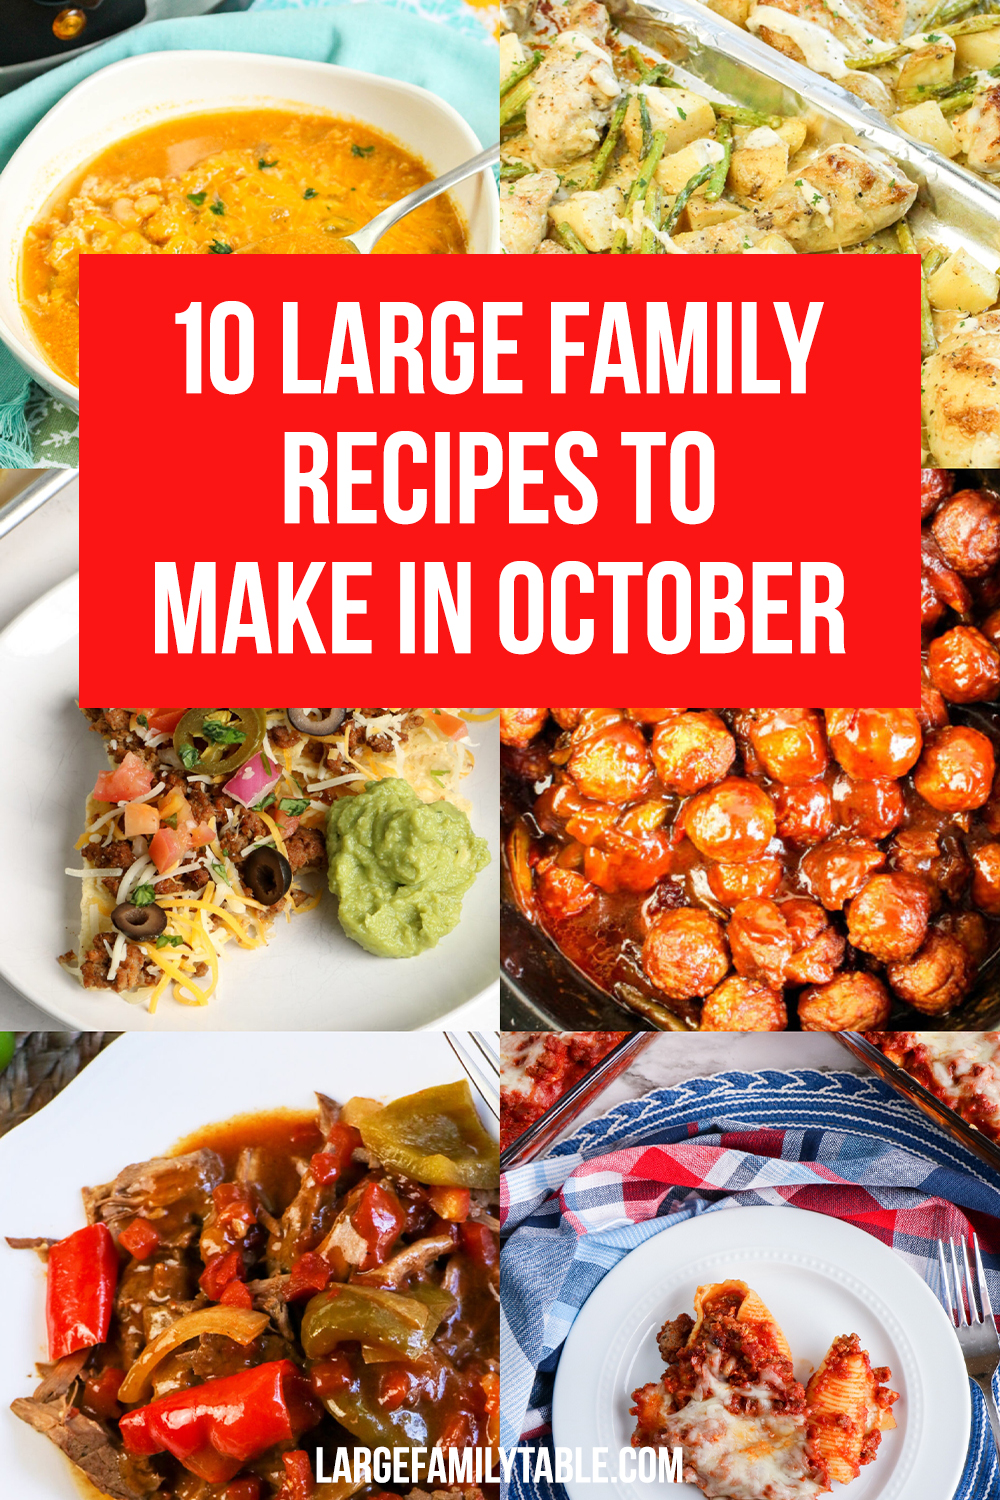 10-Large-Family-Recipes-to-Make-in-October